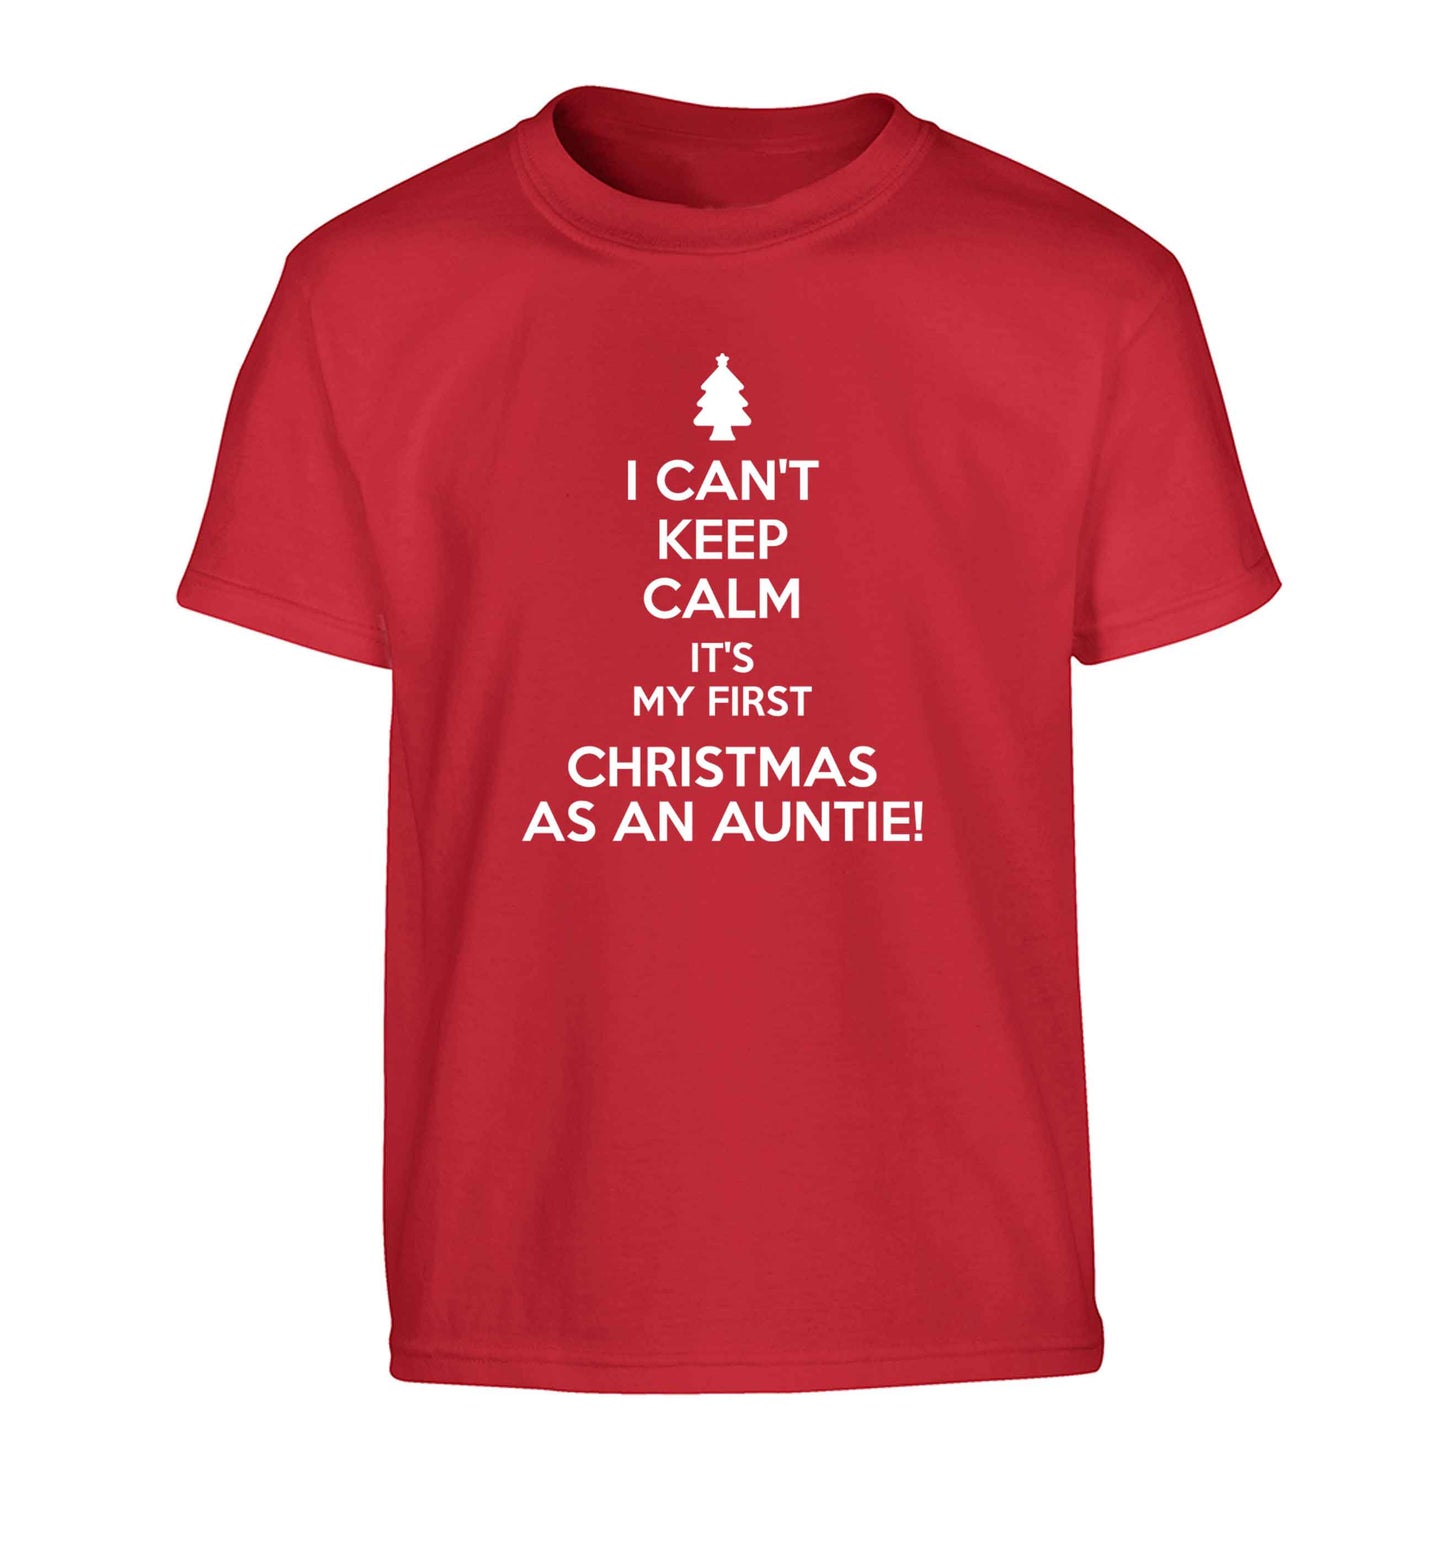 I can't keep calm it's my first Christmas as an auntie! Children's red Tshirt 12-13 Years